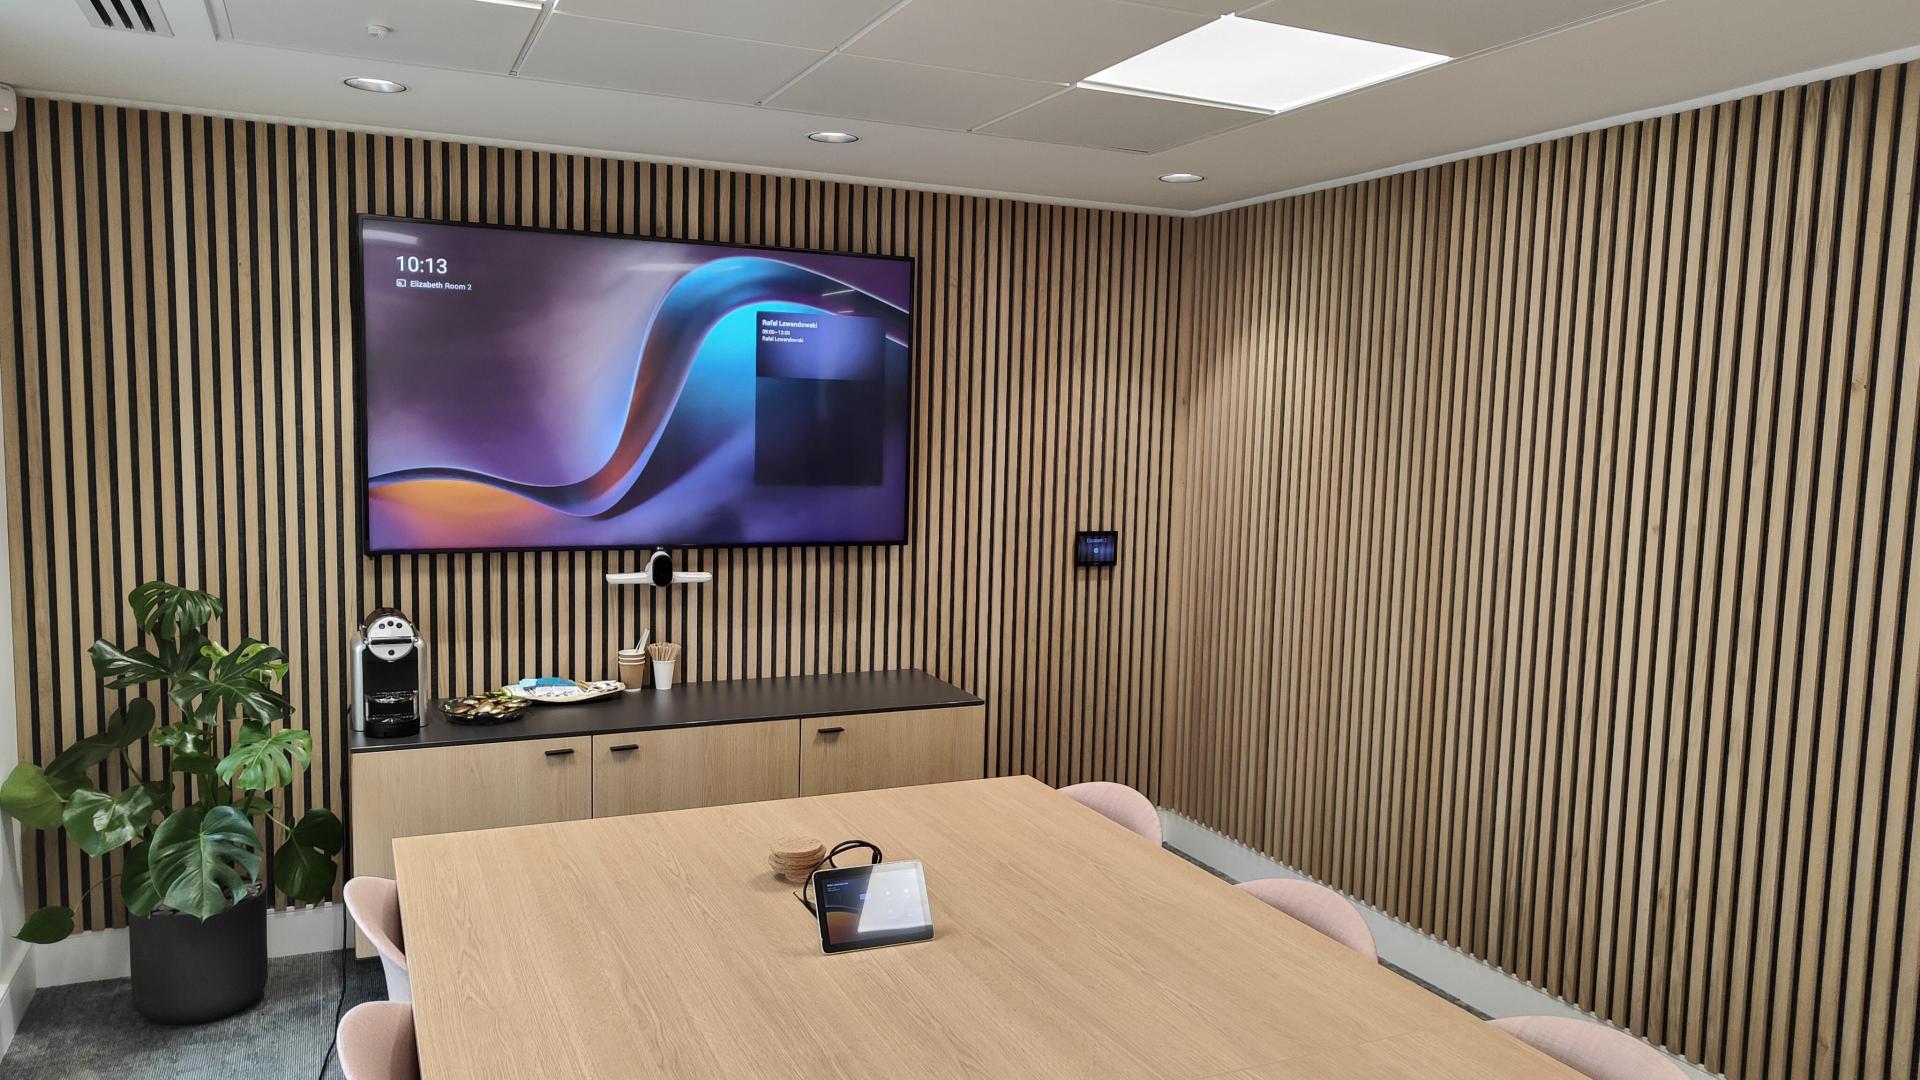 Large boardroom meeting room installation by Runtech Group, London and UK, Video conferencing installation